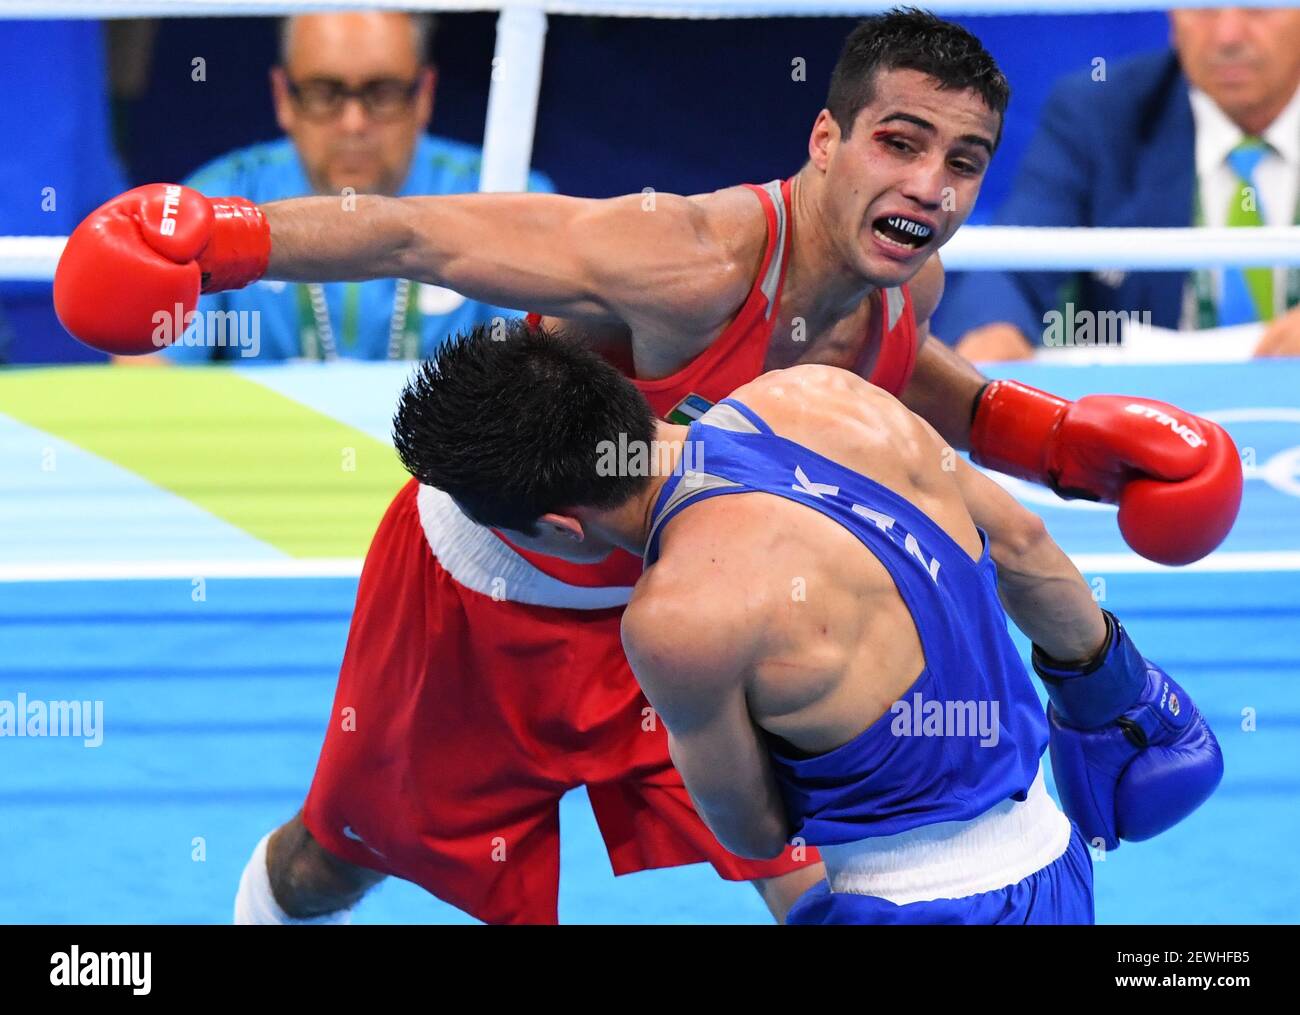 Shakhram Giyasov (UZB), red and Daniyar Yeleussinov (KAZ), blue, compete in  a men's welterweight boxing match finals at Riocentro - Pavilion 6 during  the Rio 2016 Summer Olympic Games. Mandatory Credit: Robert